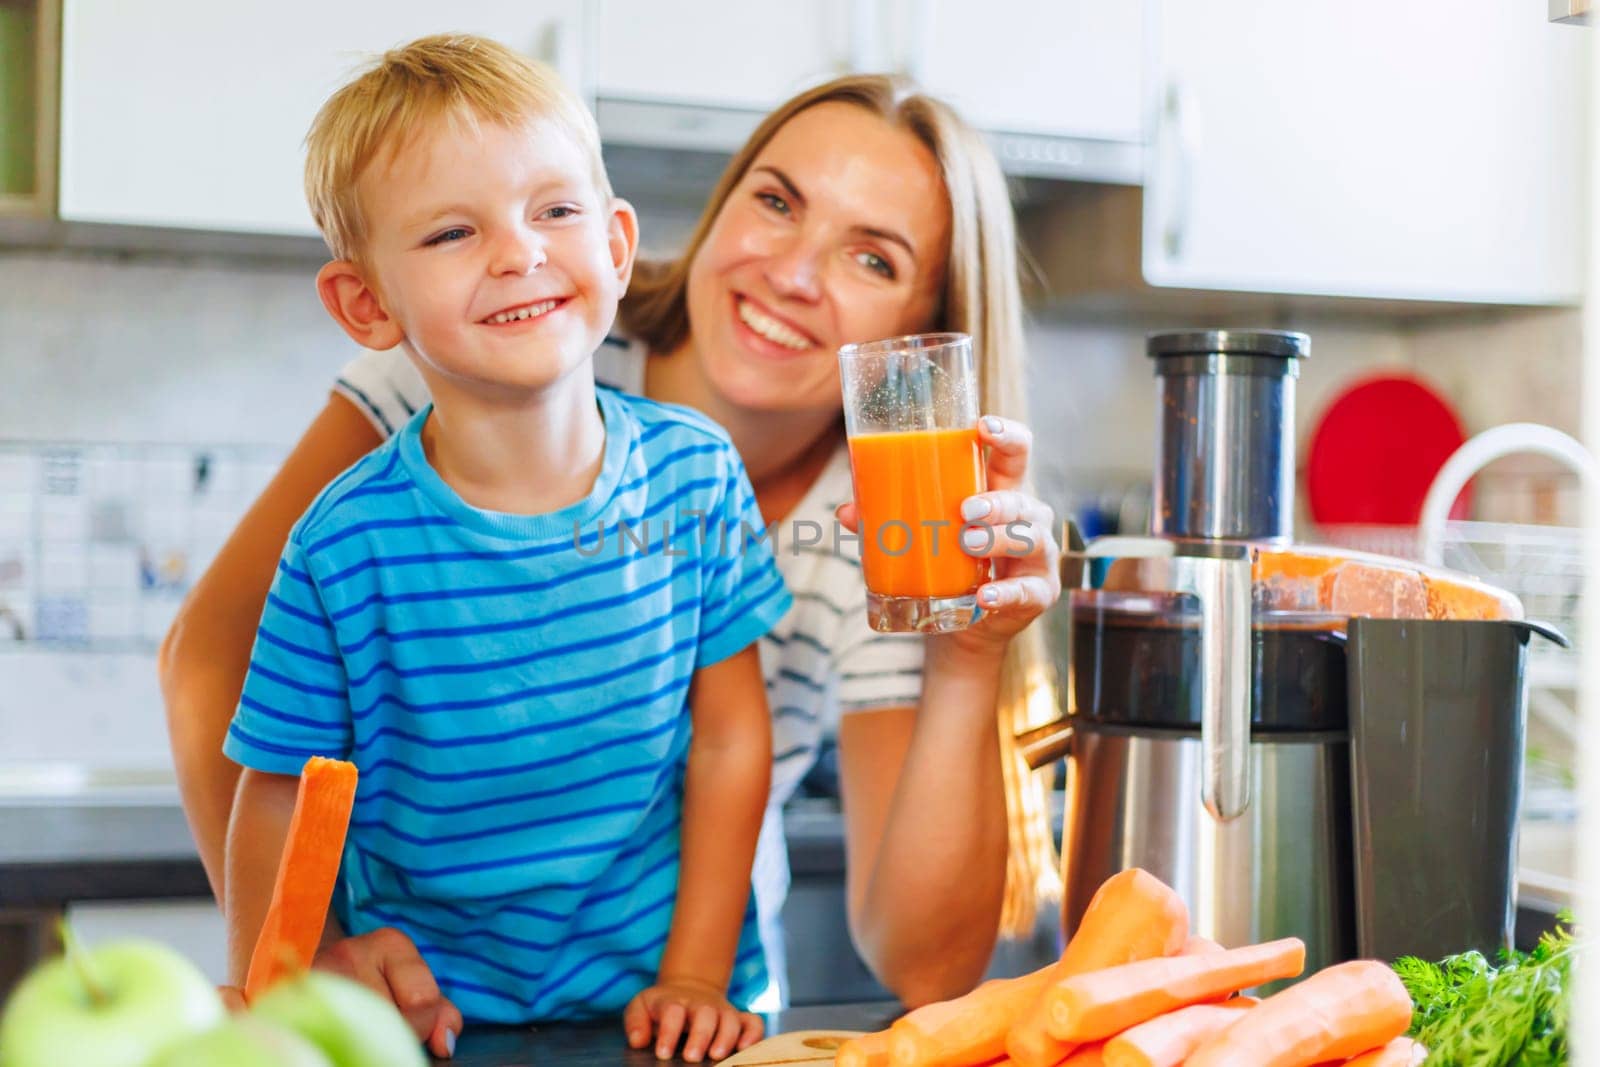 Mom and son drink fresh carrot juice squeezed using a juicer in the kitchen at home. Family nutrition, healthy eating concept